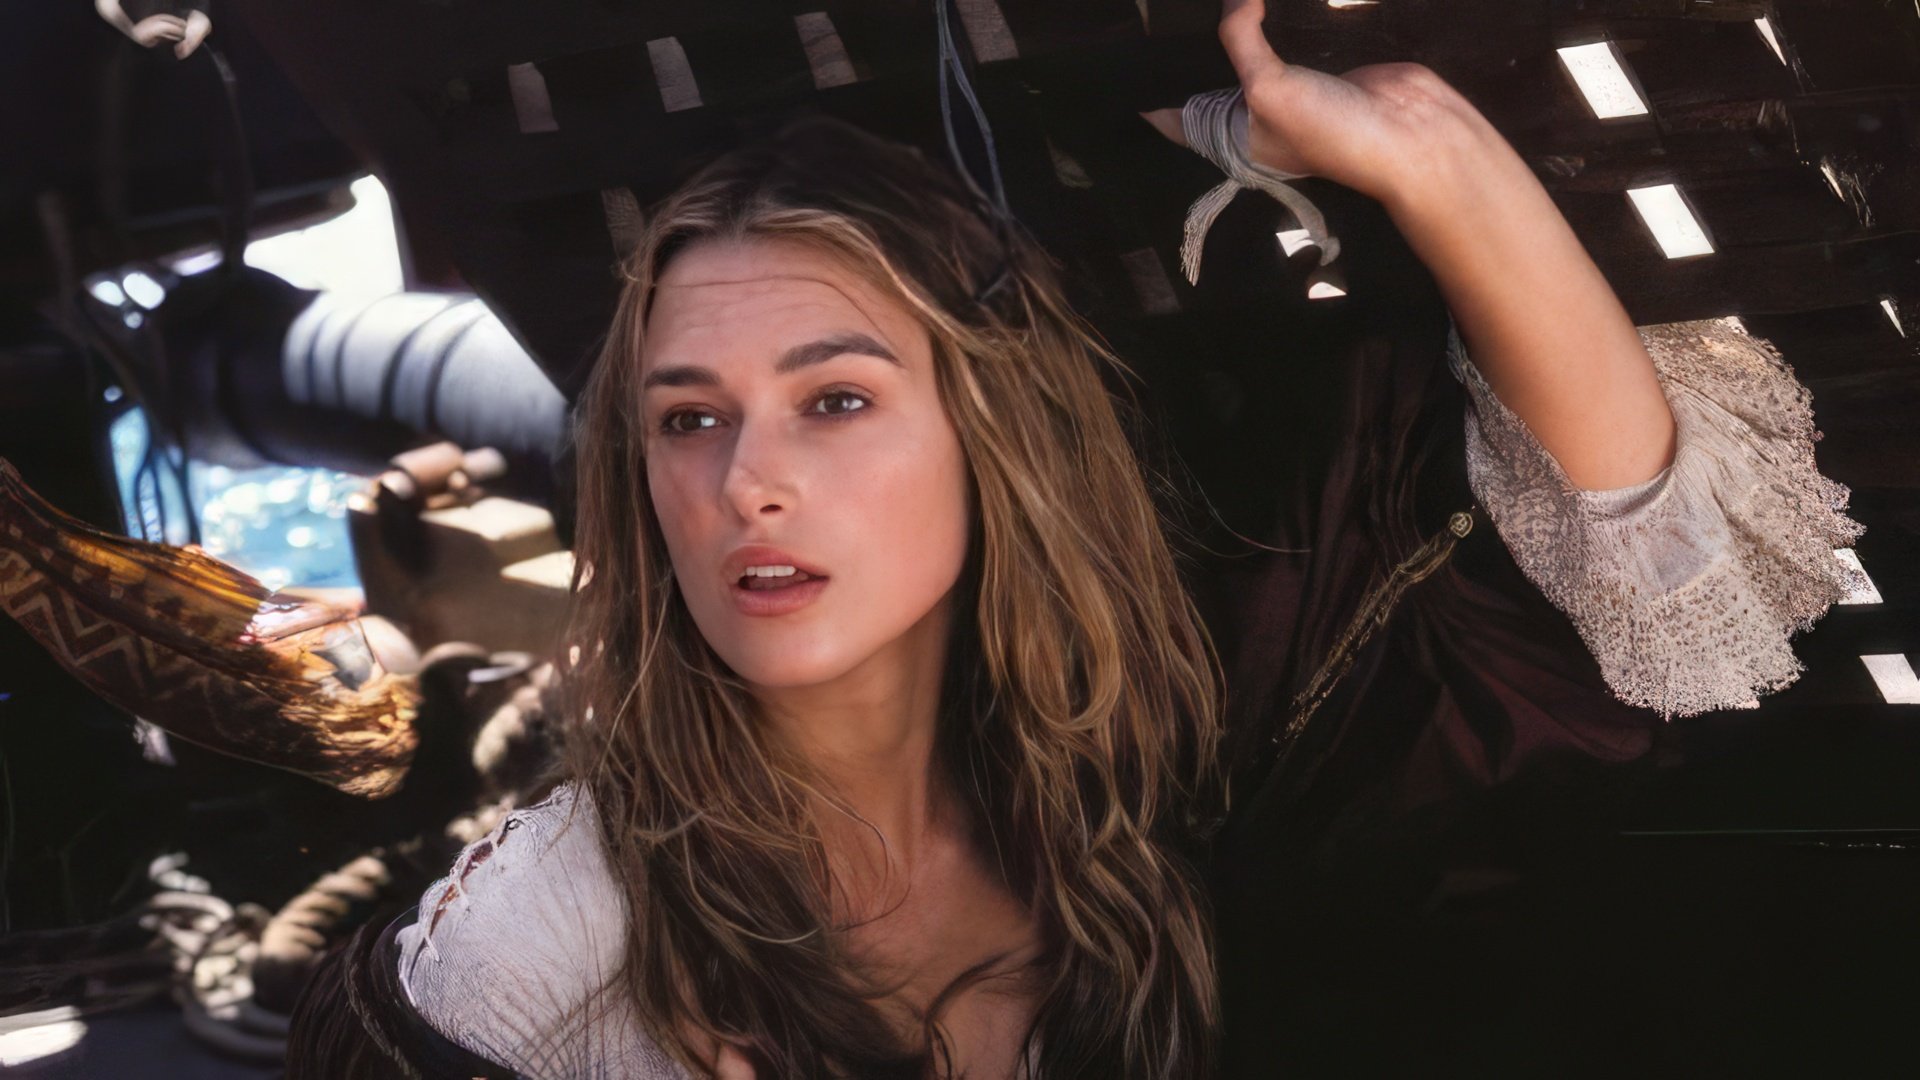 Keira Knightley came back for the fifth installment of the “Pirates of the Caribbean”